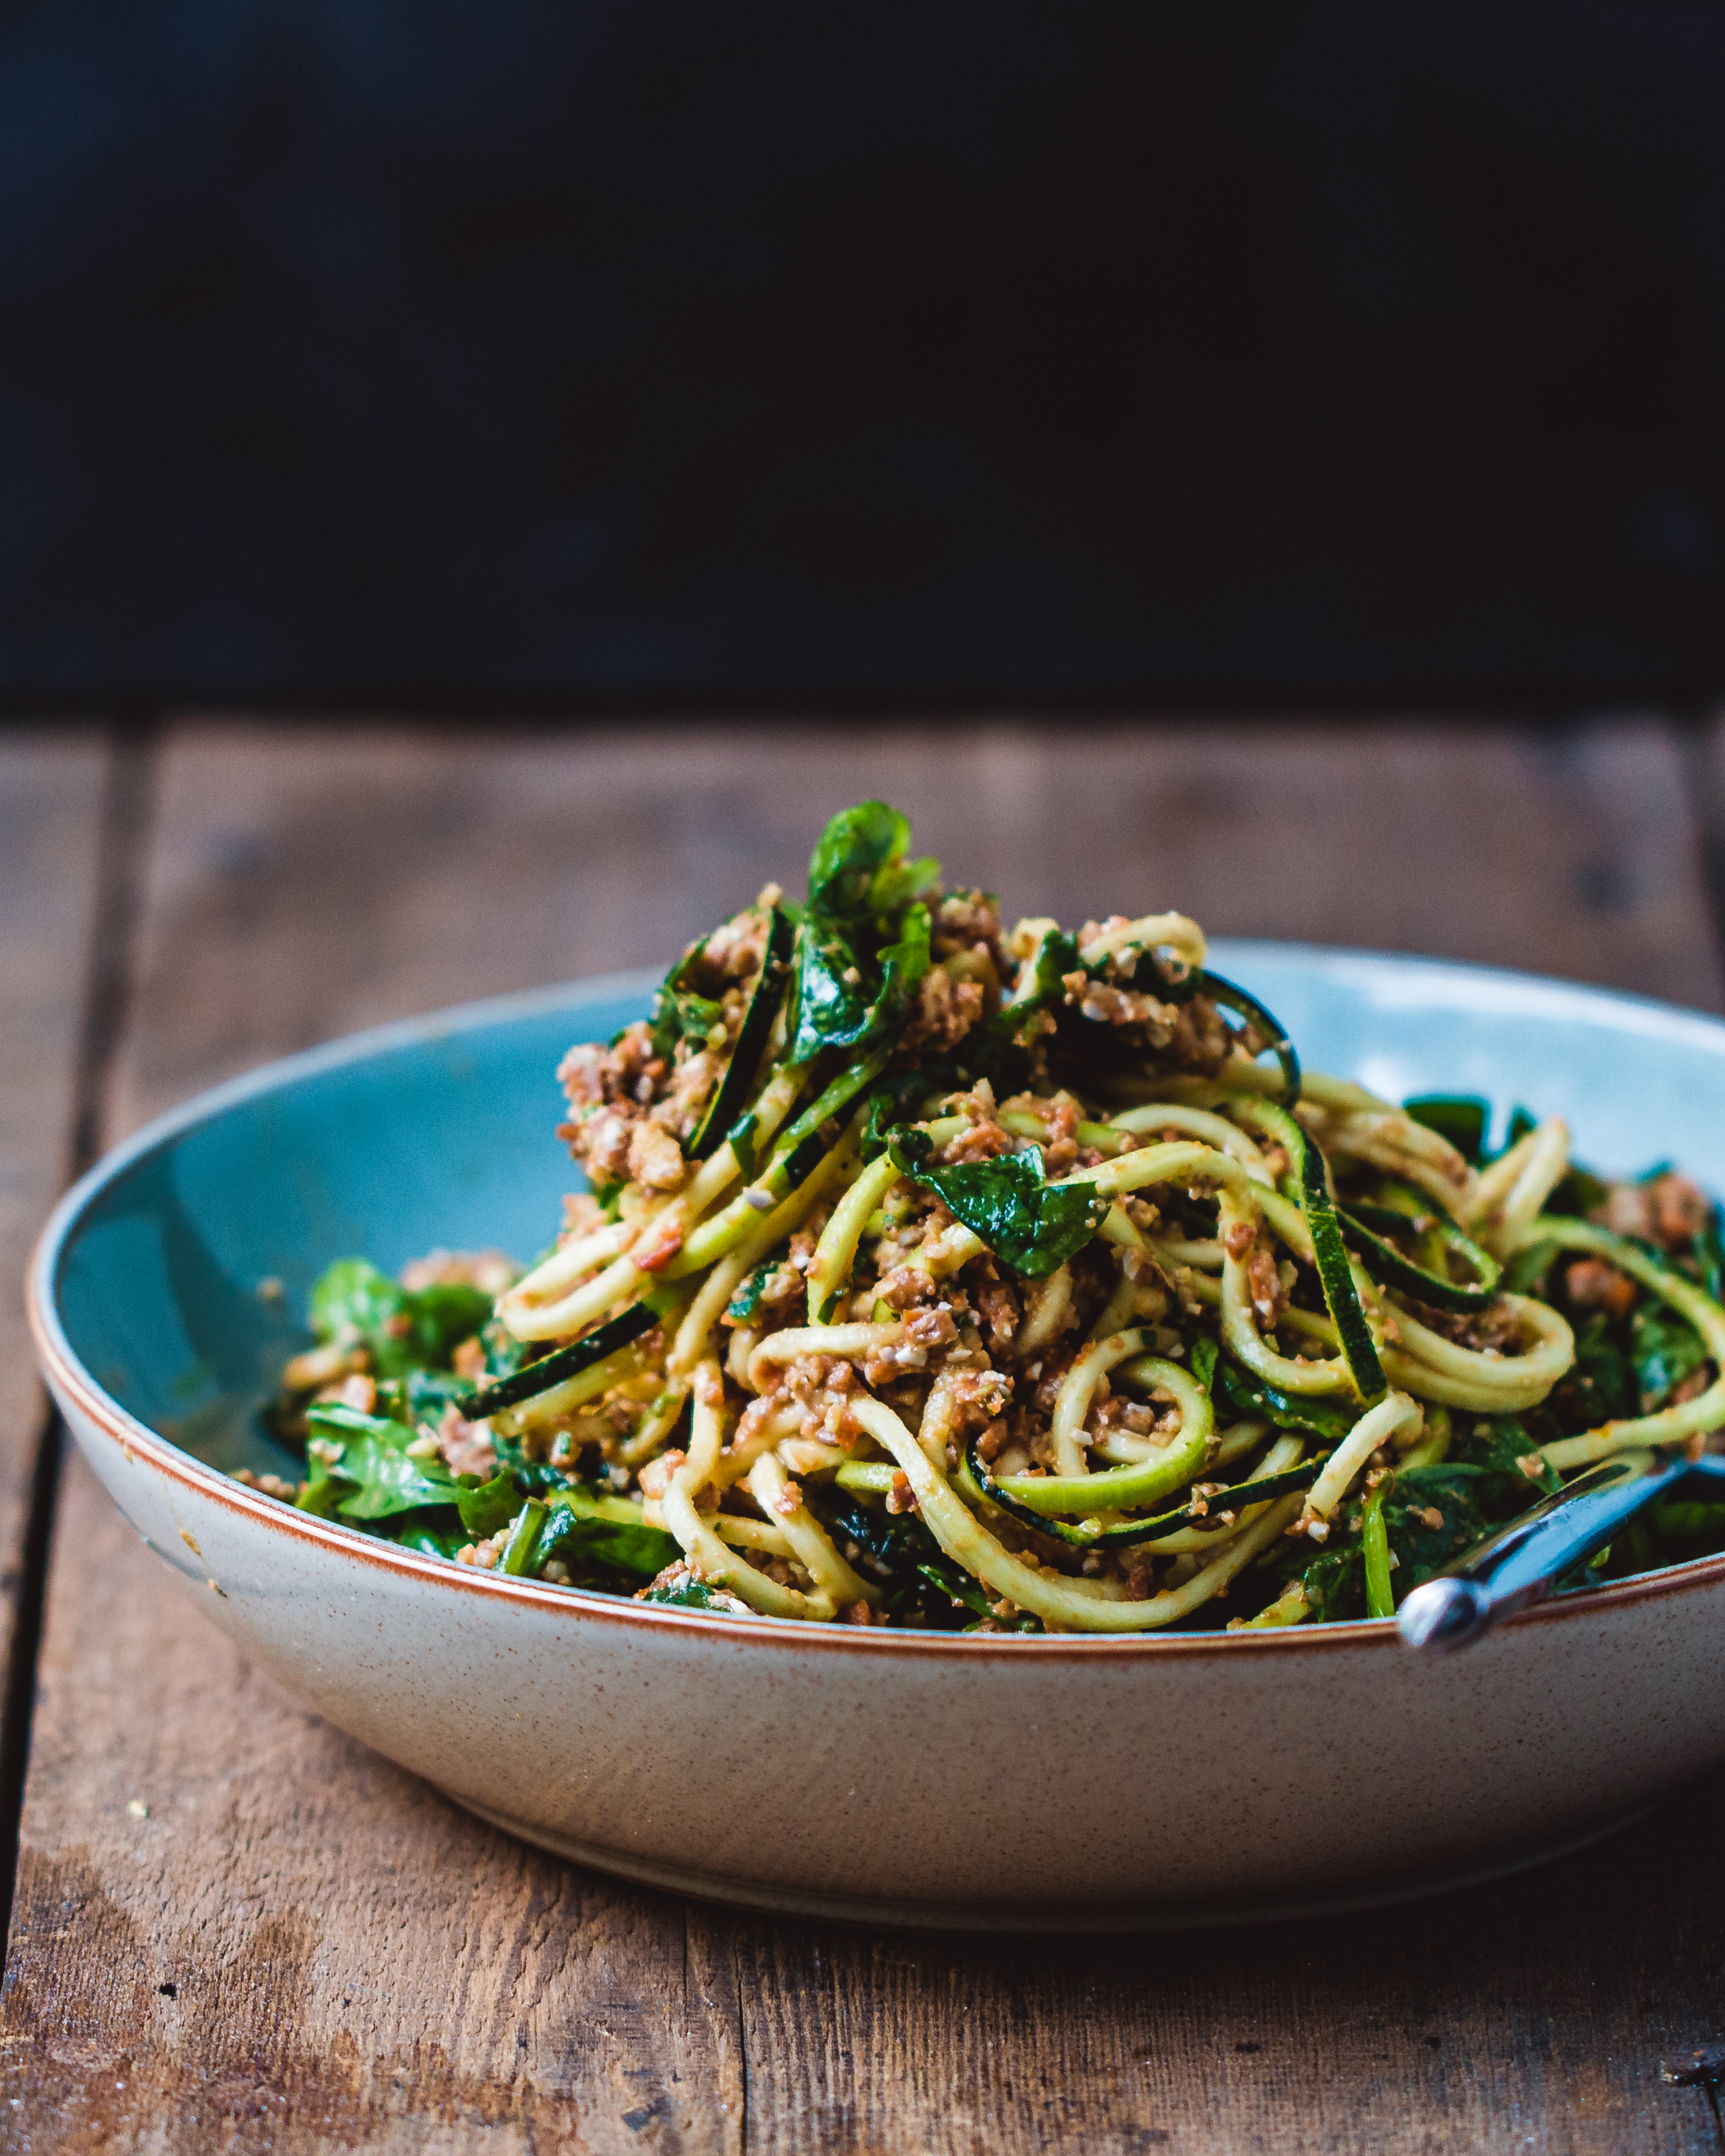 Raw vegan zucchini spaghetti bolognese in a blue and white bowl on a wooden surface